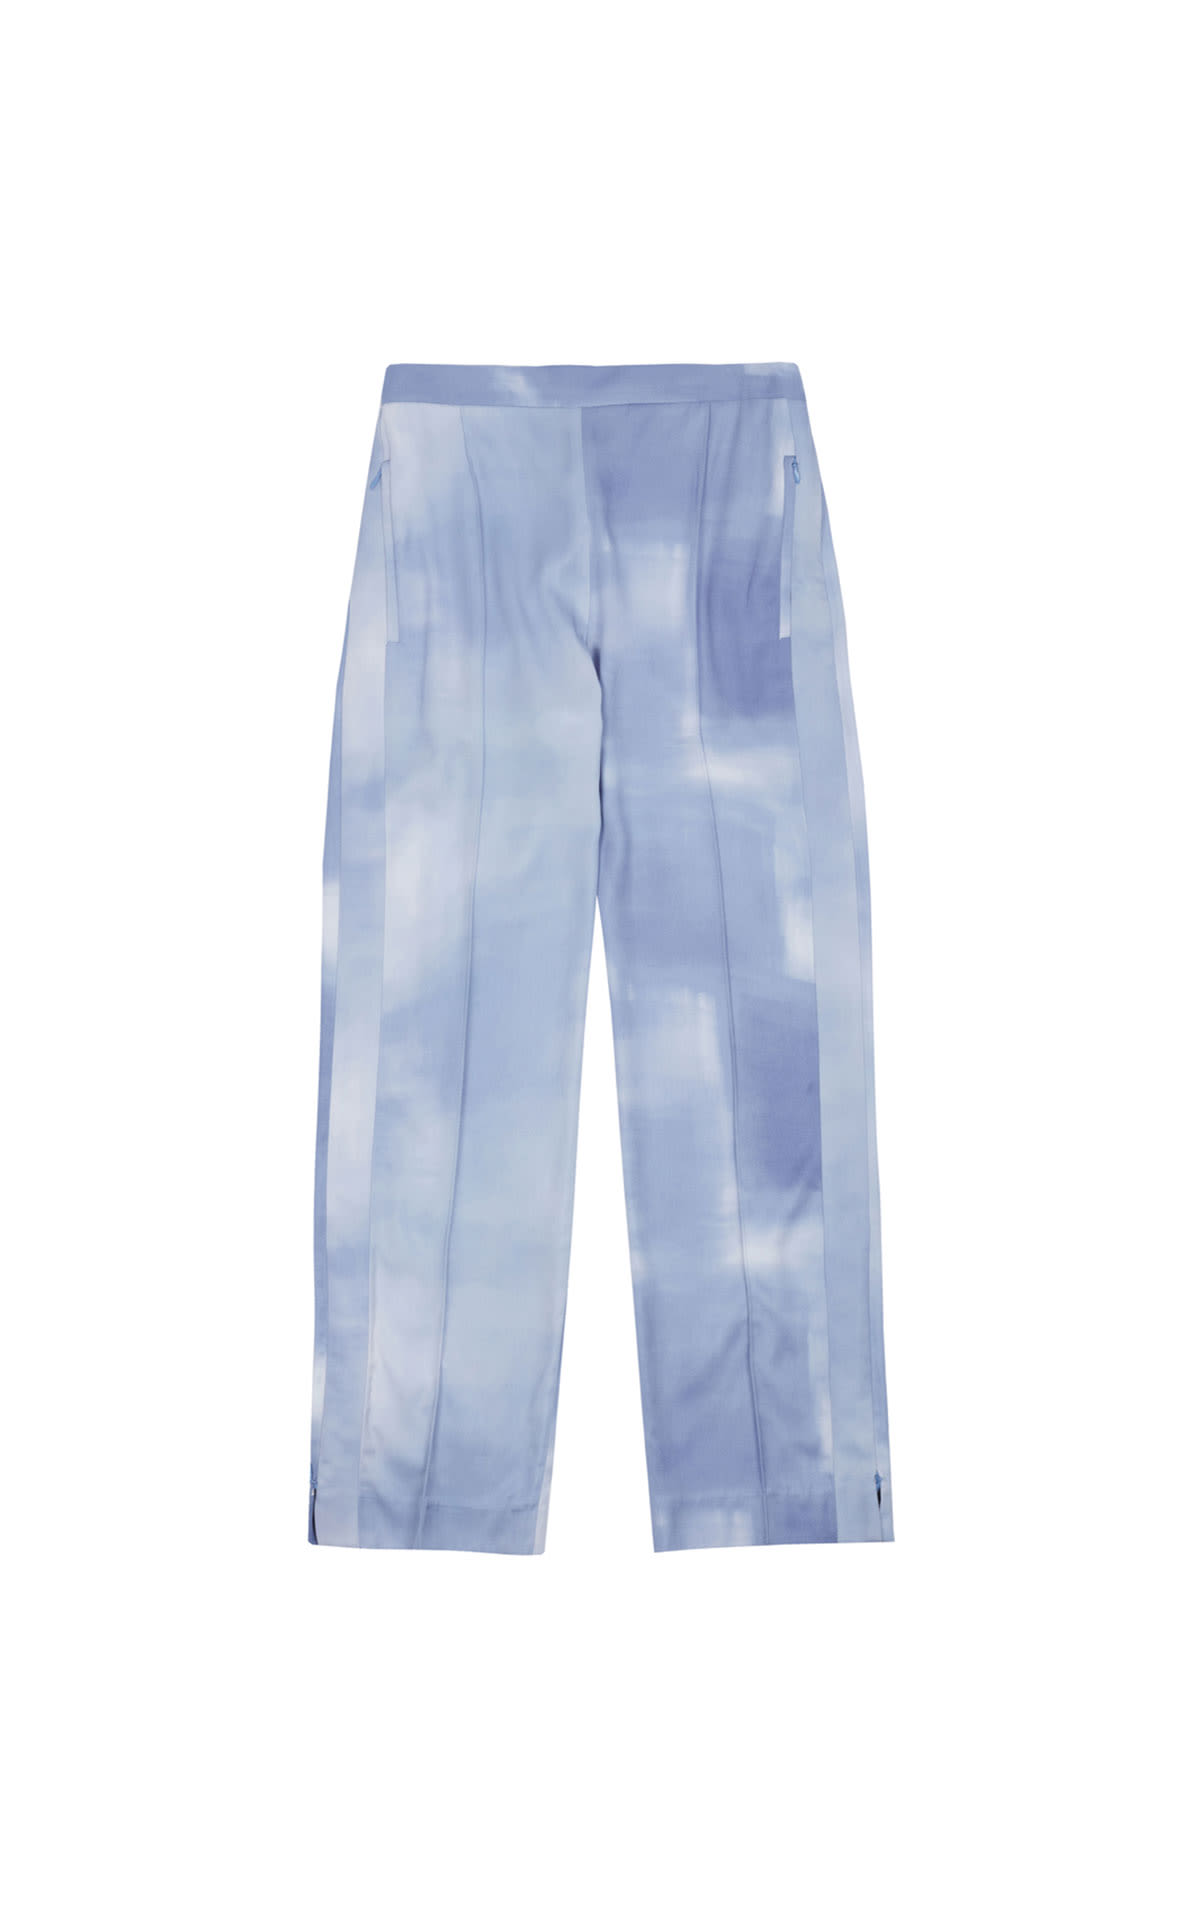 Eleventy Spring trousers from Bicester Village